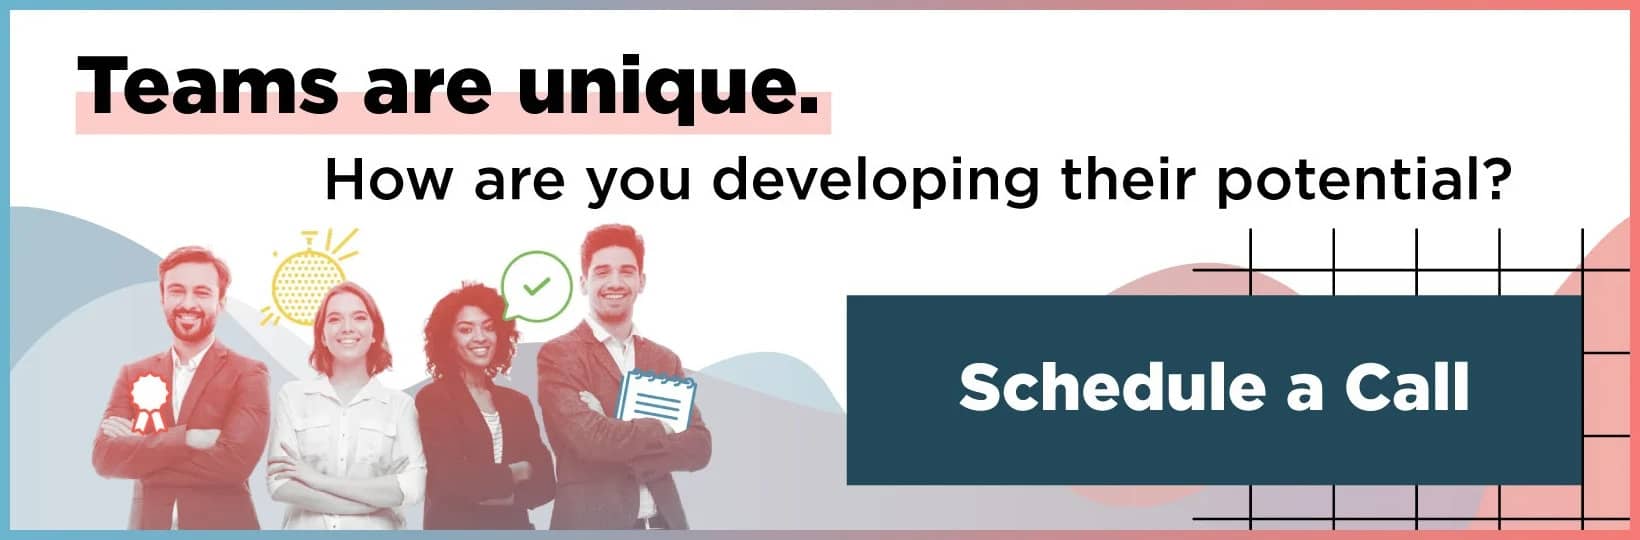 Teams are unique. How are you developing their potential? Schedule a call